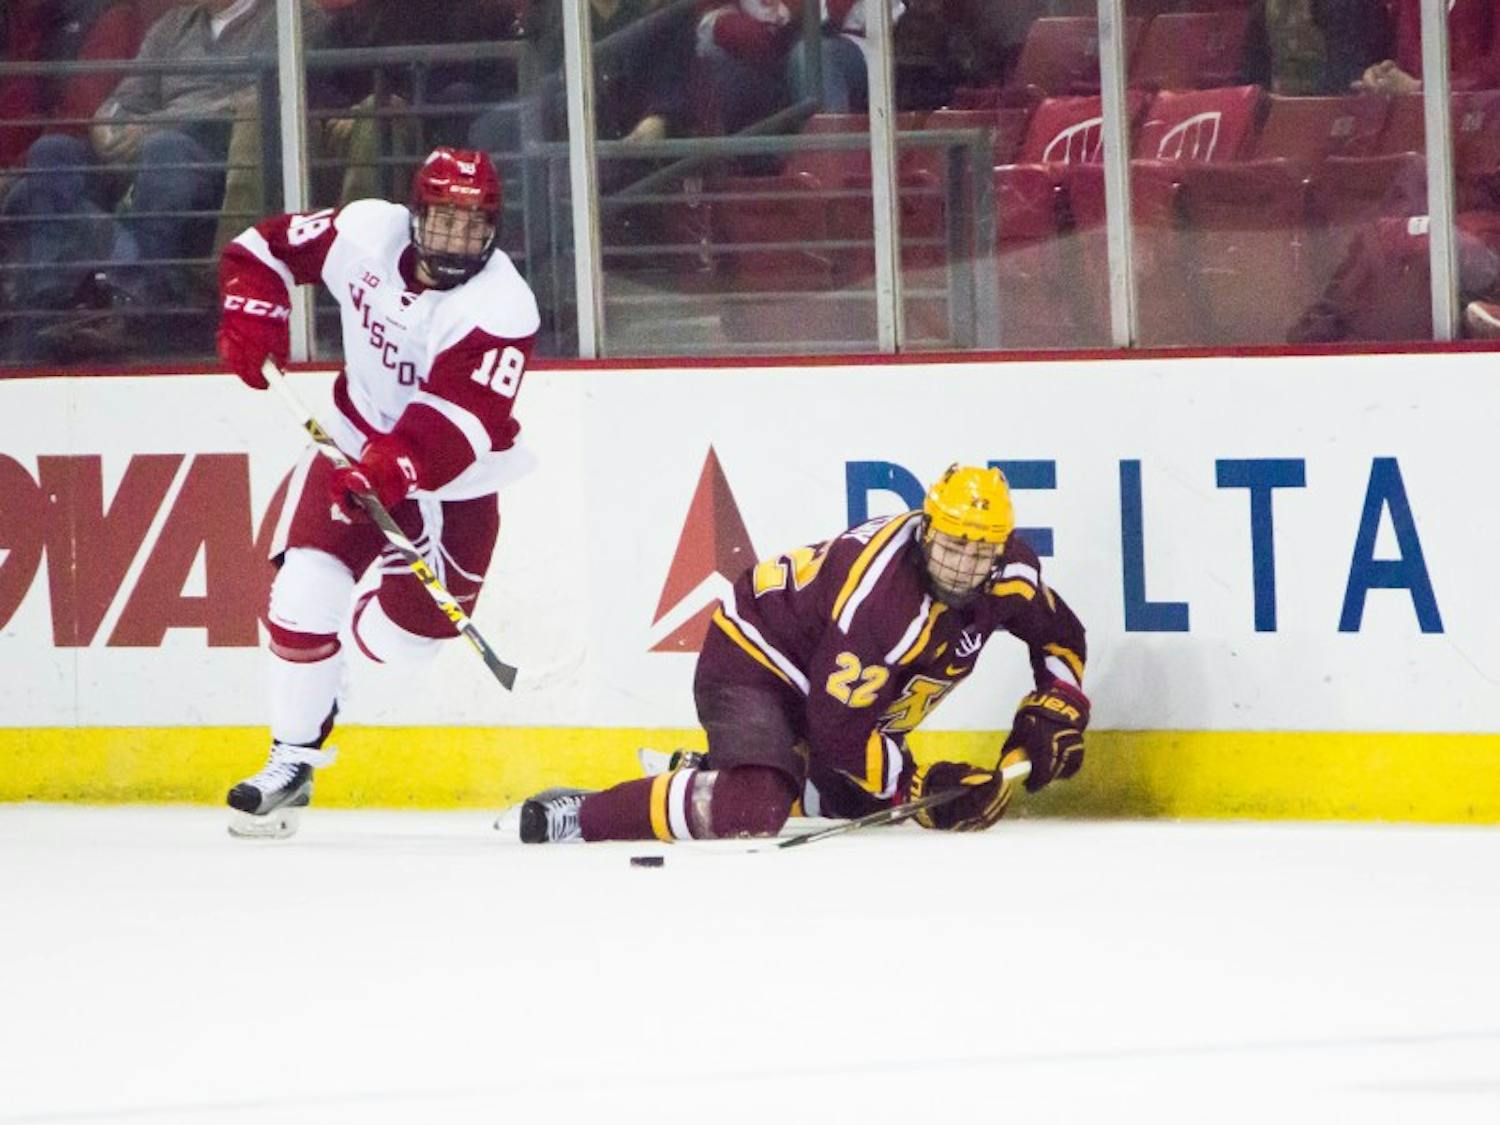 Seamus Malone helped the Badgers earn a win on Saturday after a lackluster loss on Friday.